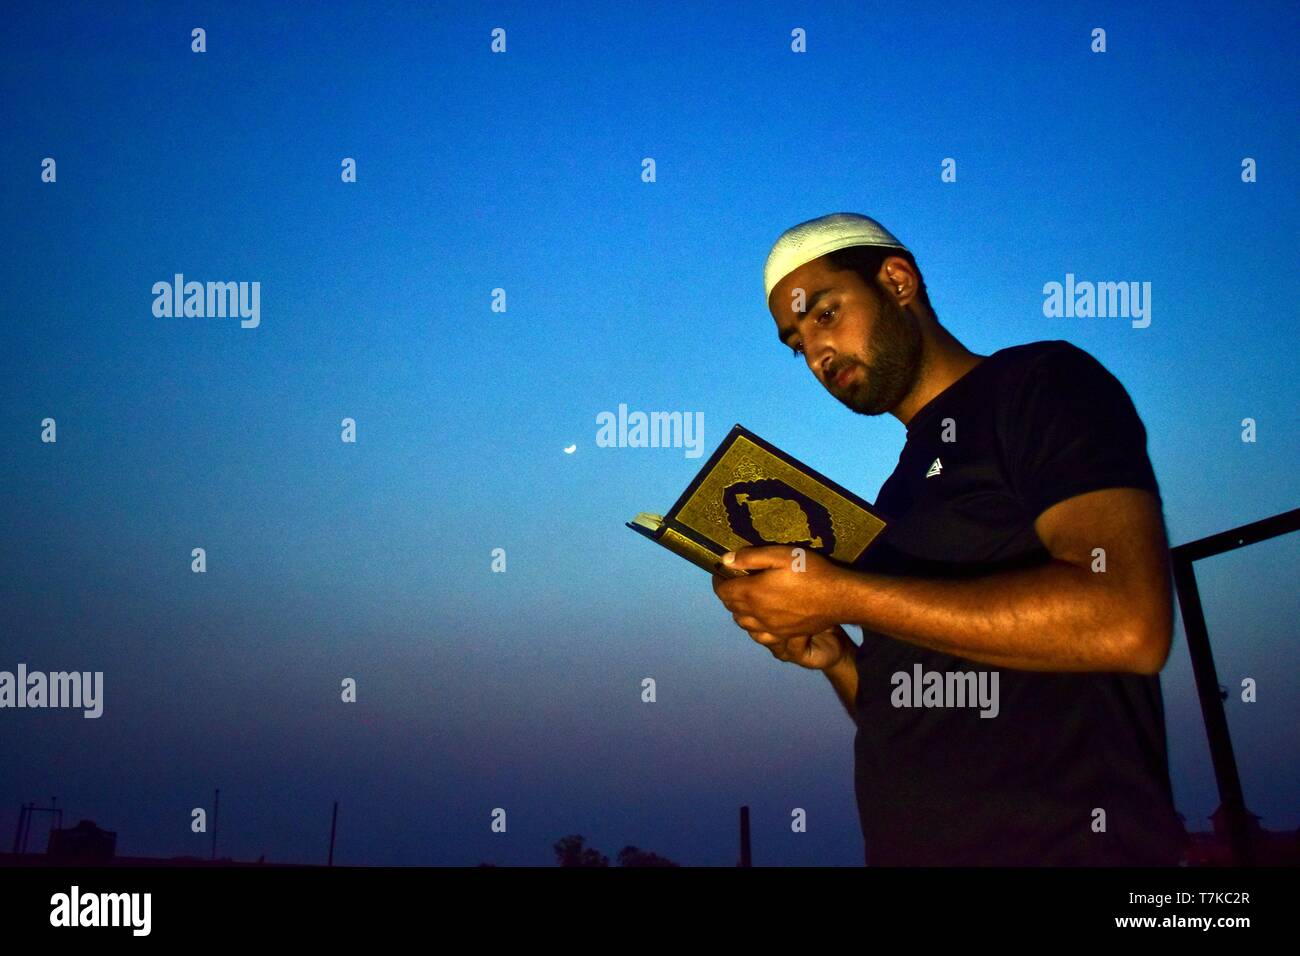 A man seen reciting the holy Quran during the first day of the holy fasting month of Ramadan in Patiala. Muslims throughout the world are marking the month of Ramadan, the holiest month in the Islamic calendar in which devotees fast from dawn till dusk. Stock Photo